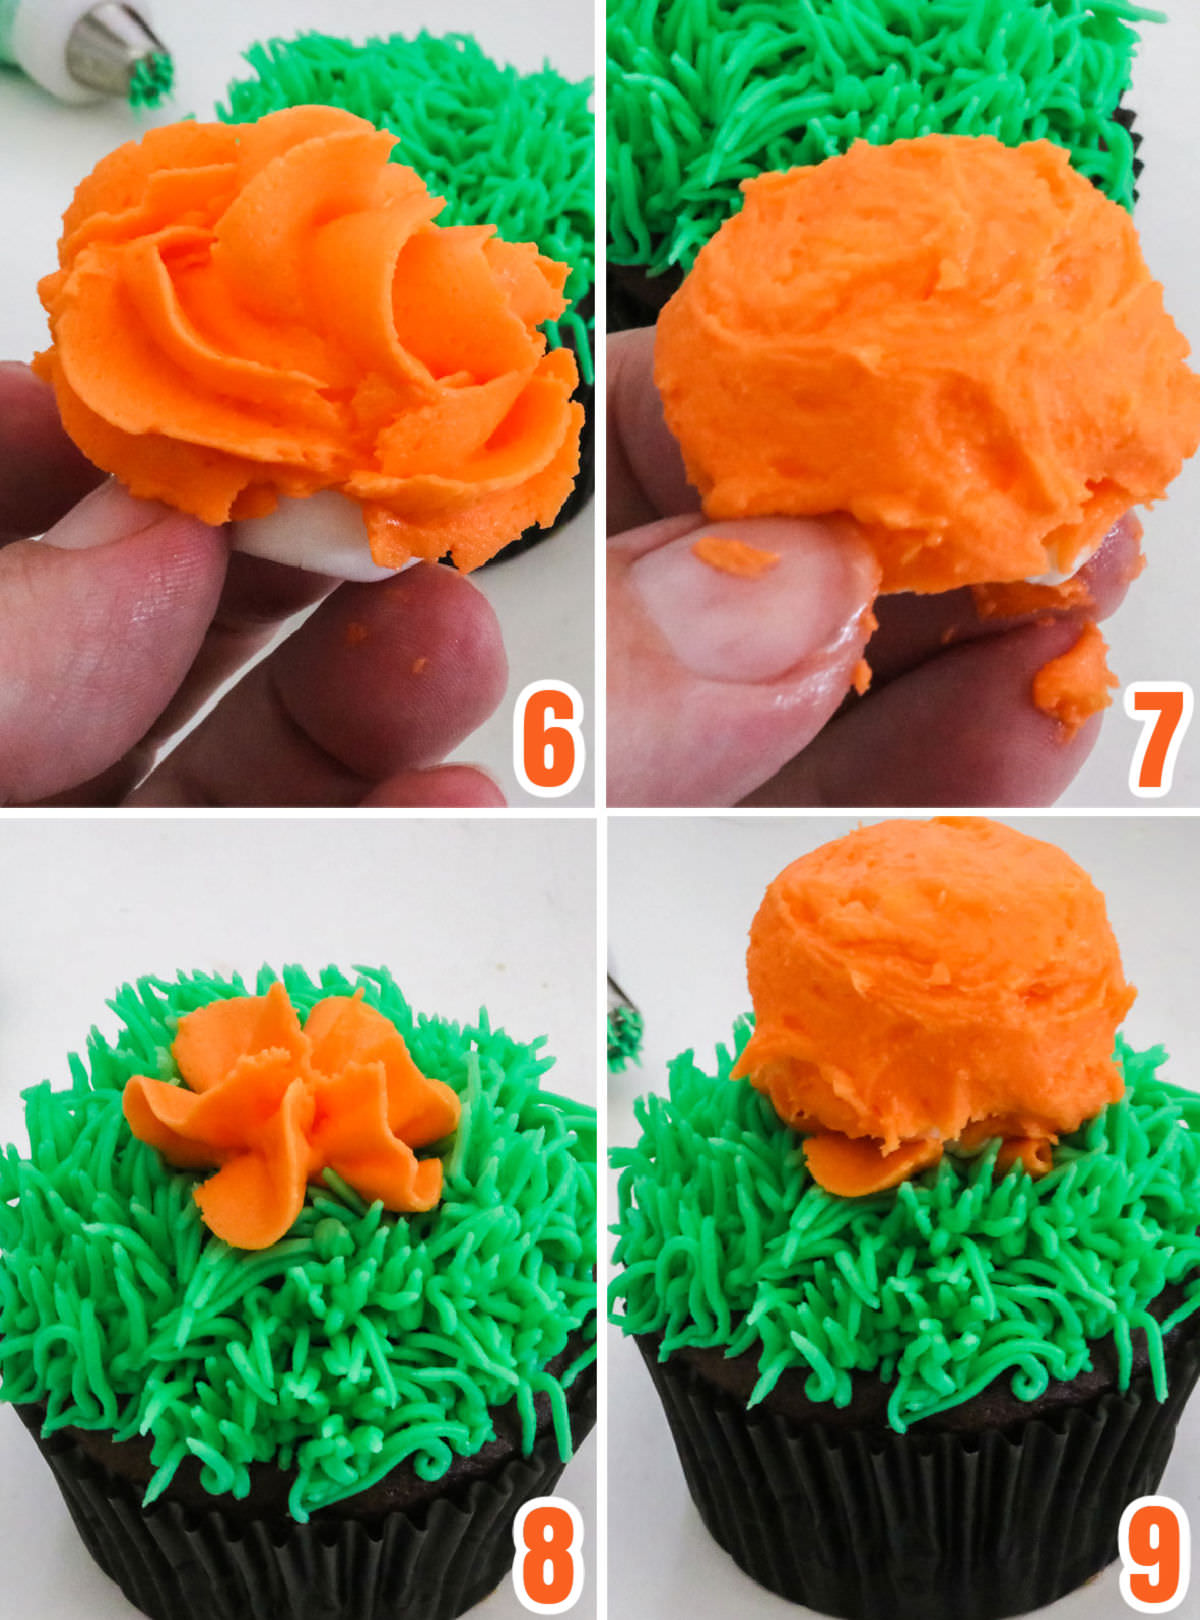 Collage image showing the steps for placing the frosting covered marshmallow on the top of the cupcake.